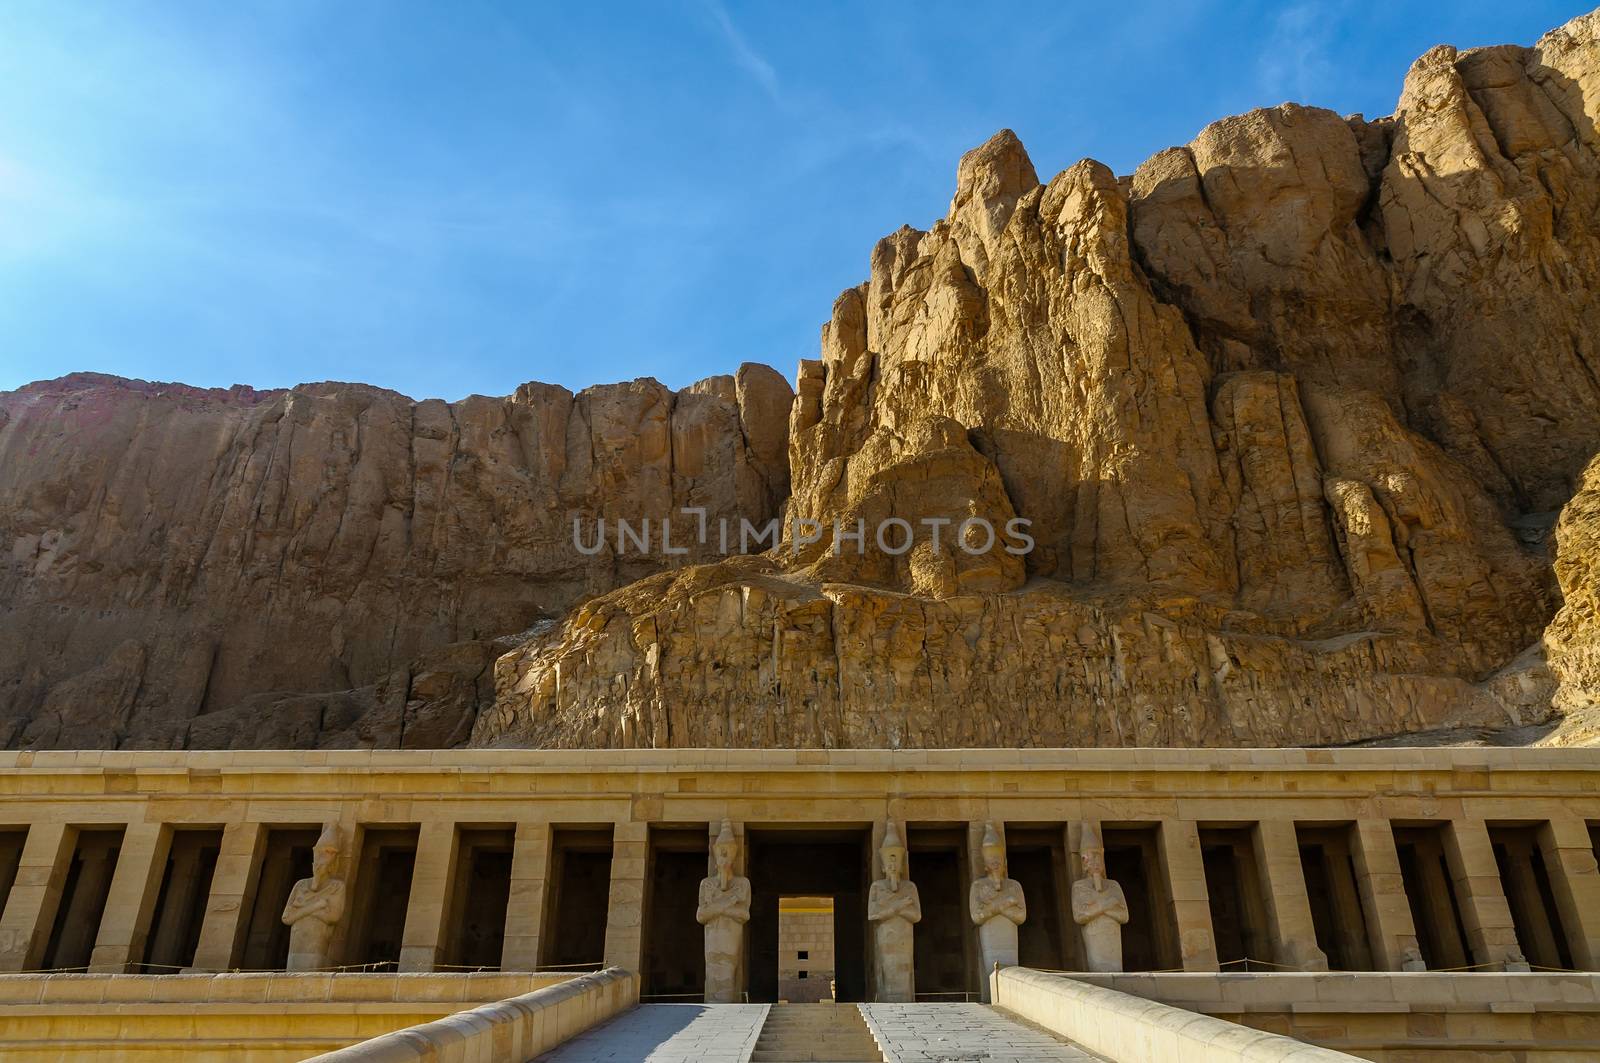 The Hatshepsut temple in the Valley of the Kings